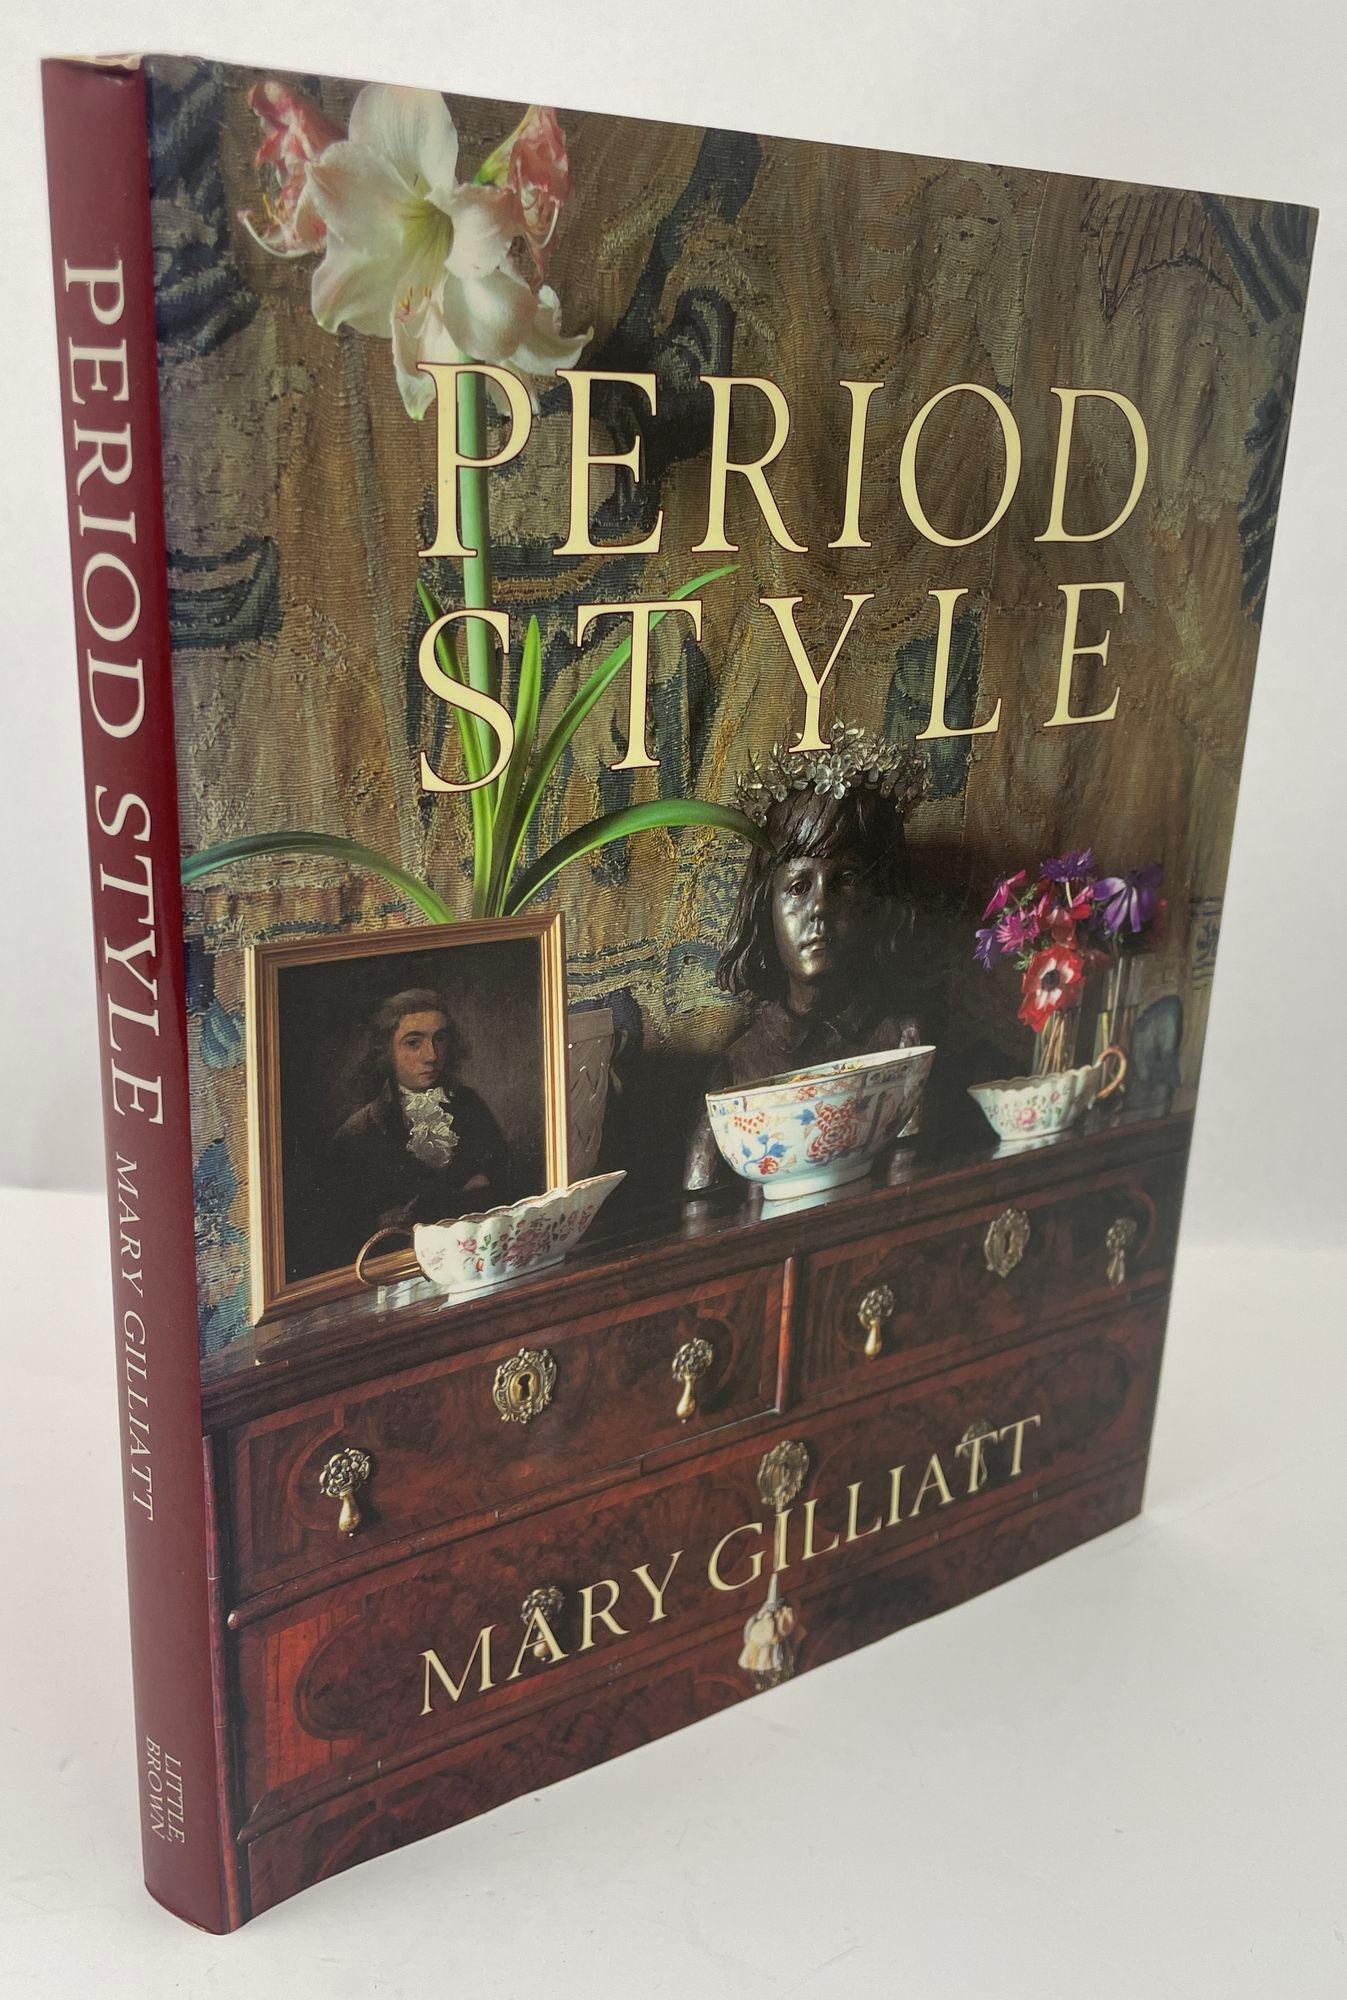 Period Style by Mary Gilliatt Elizabeth Wilhide Hardcover Book.Demonstrates how to restore or redecorate a home to particular period specifications, including advice on how to recreate authentically Empire, Art Deco, Modernist and other period